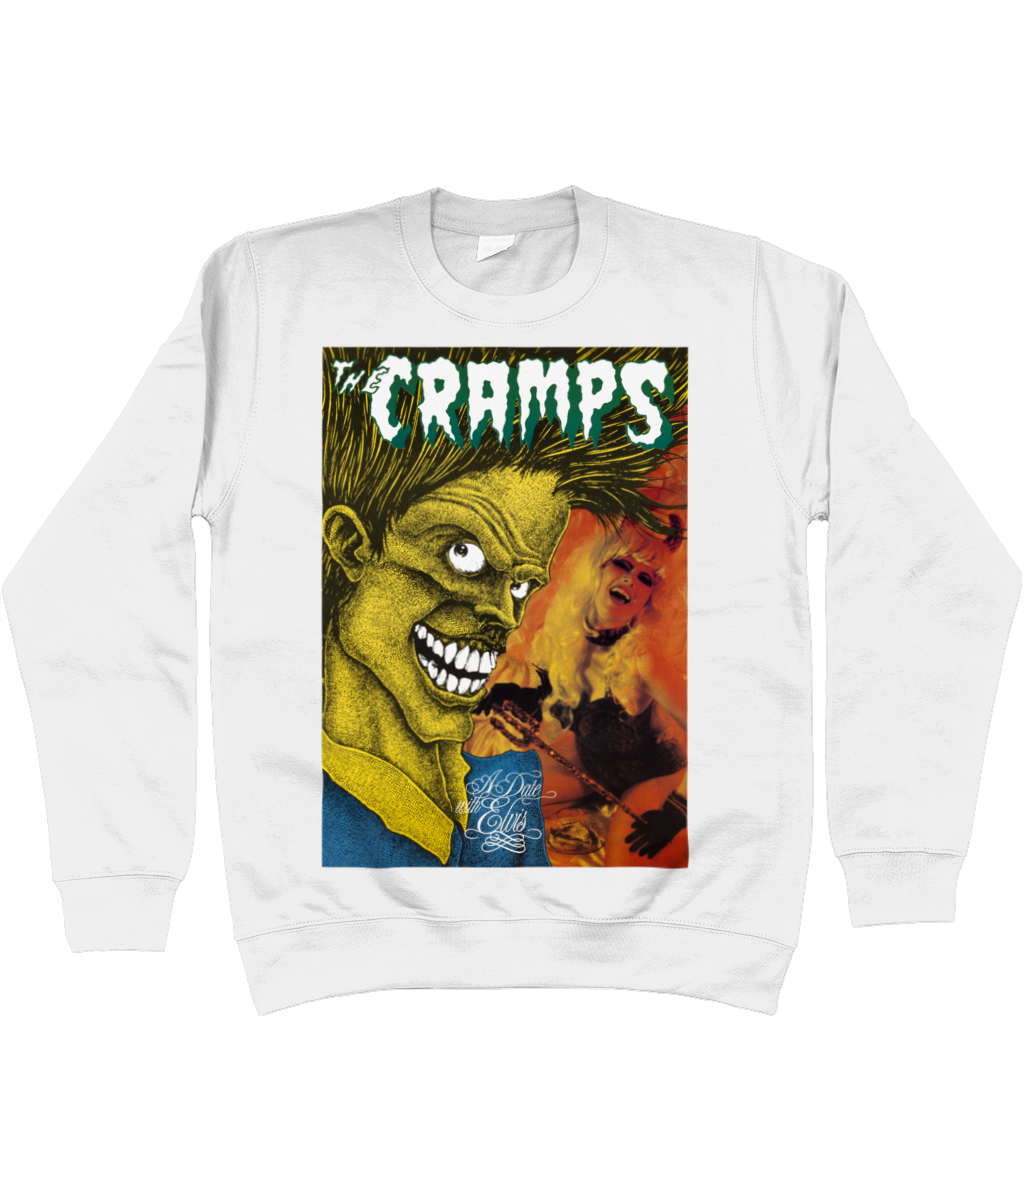 THE CRAMPS - A Date With Elvis - 1986 - Sweatshirt